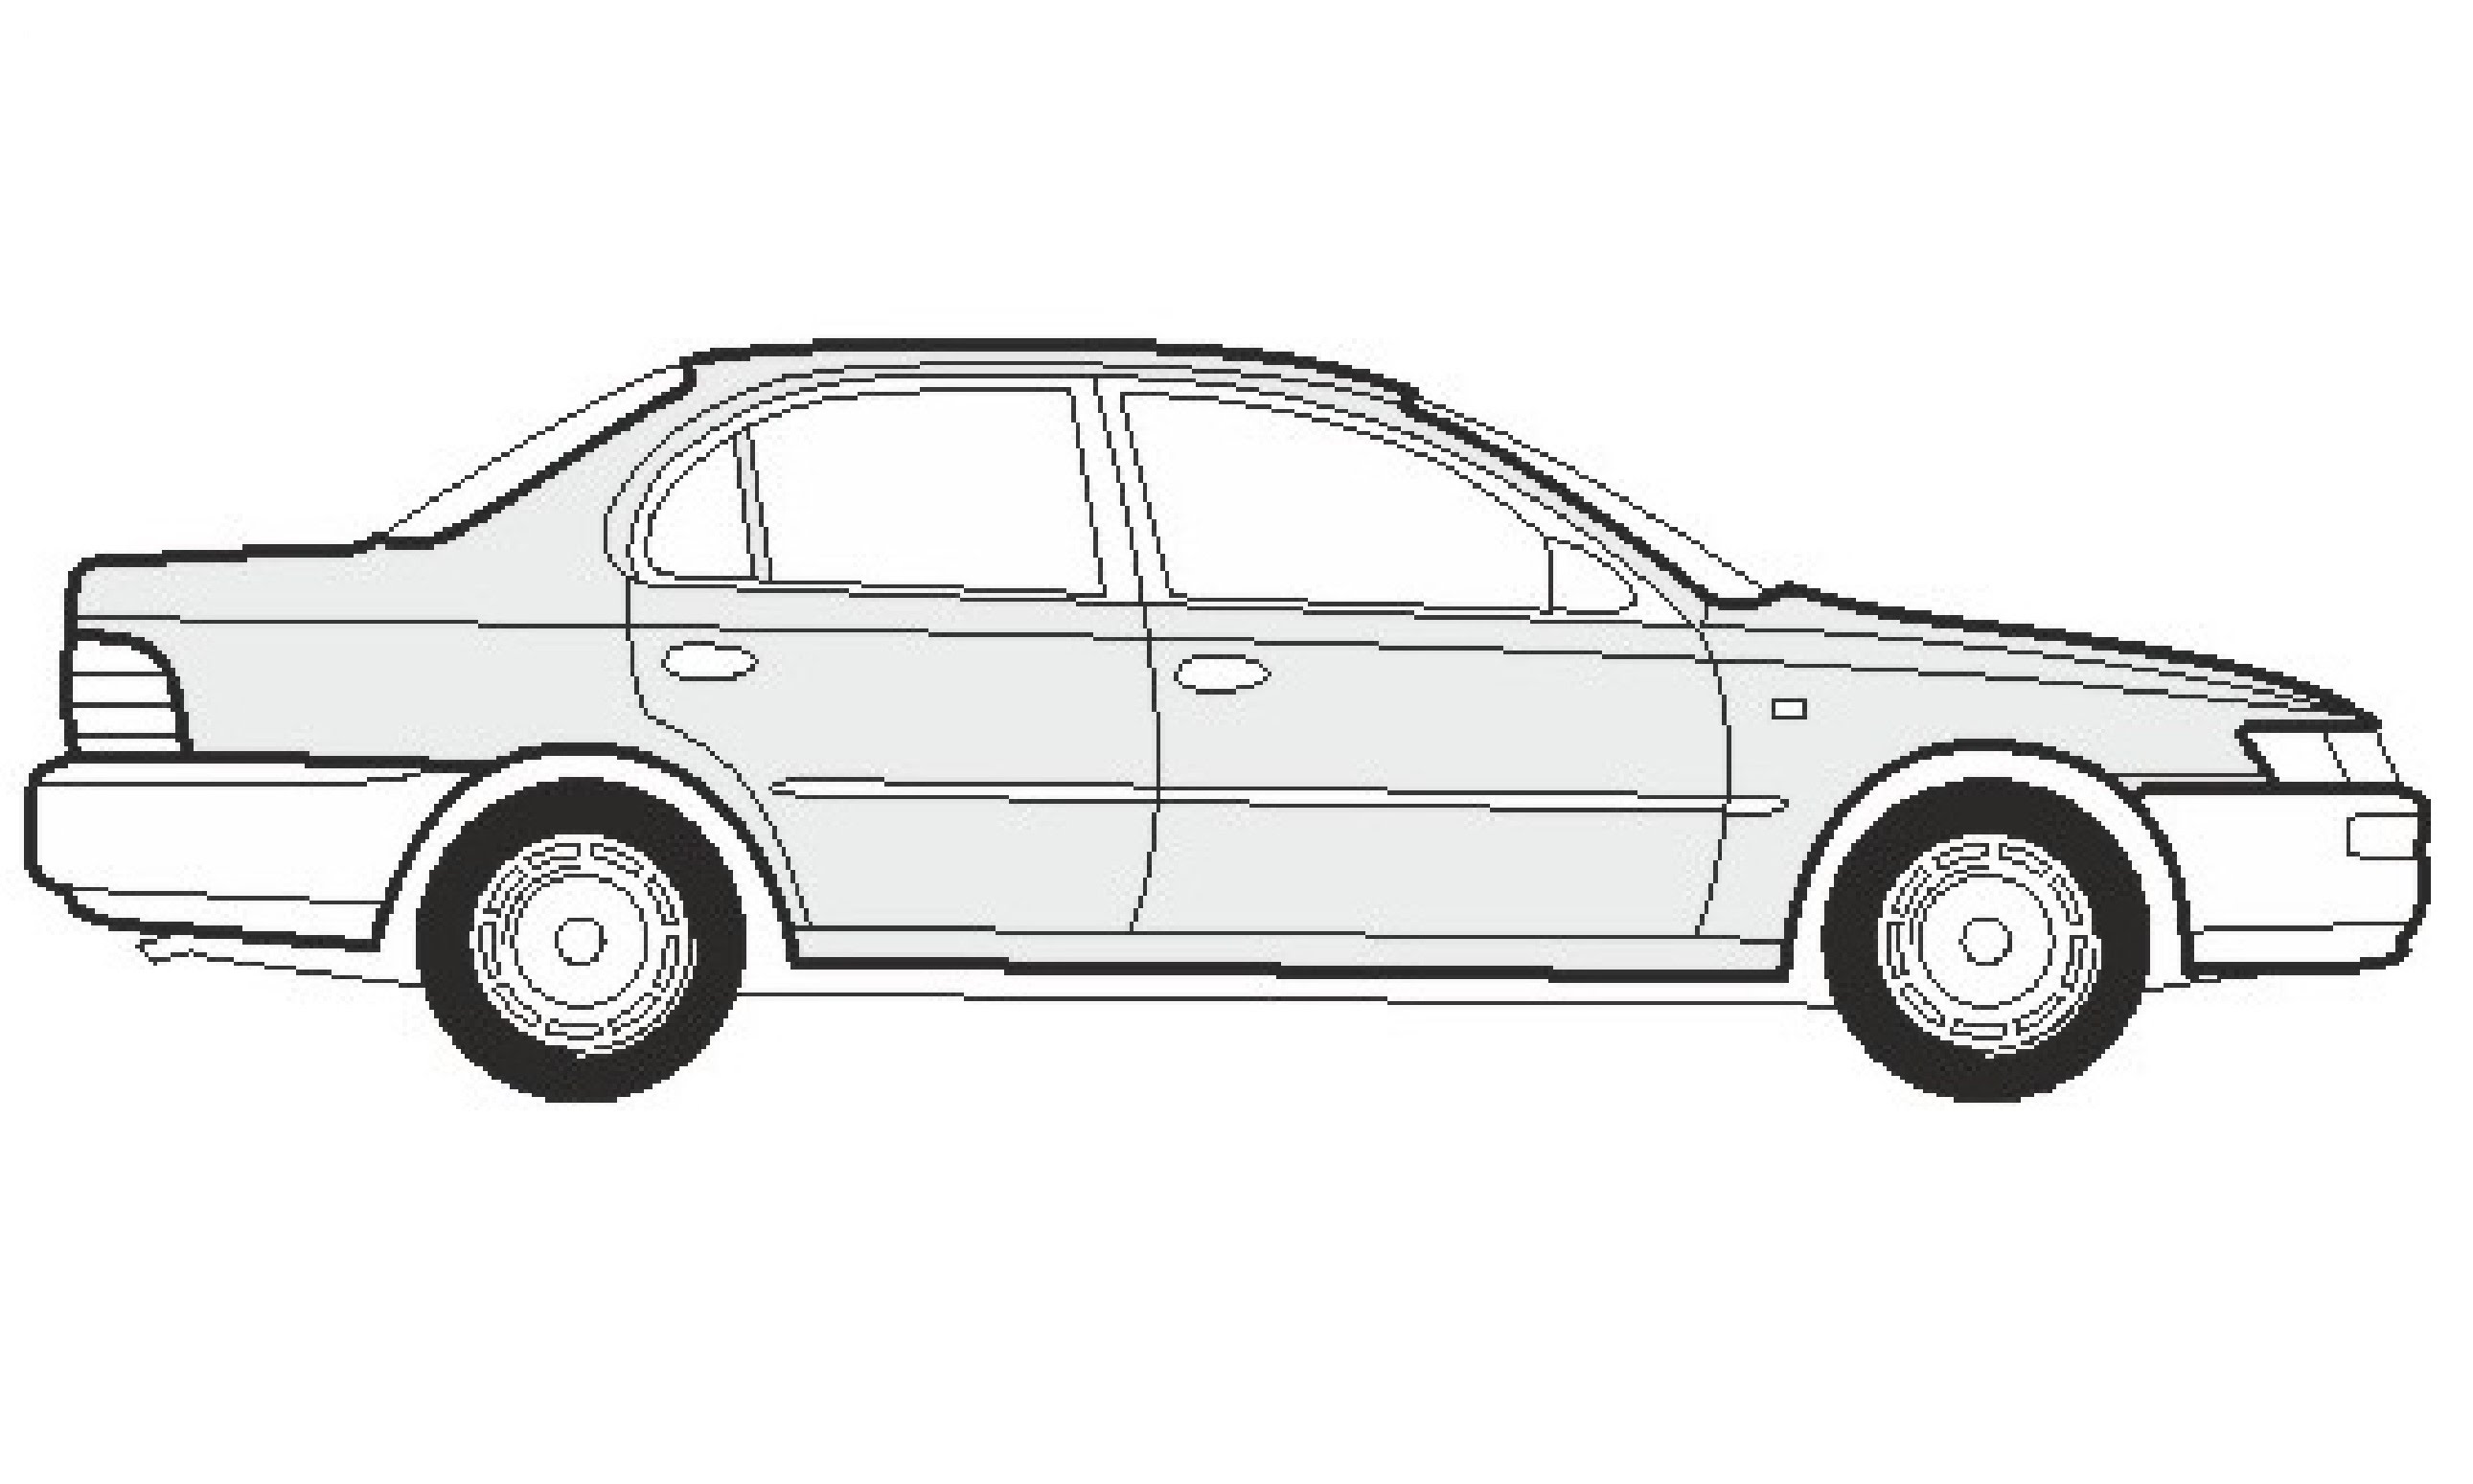 Toyota Drawing Realistic